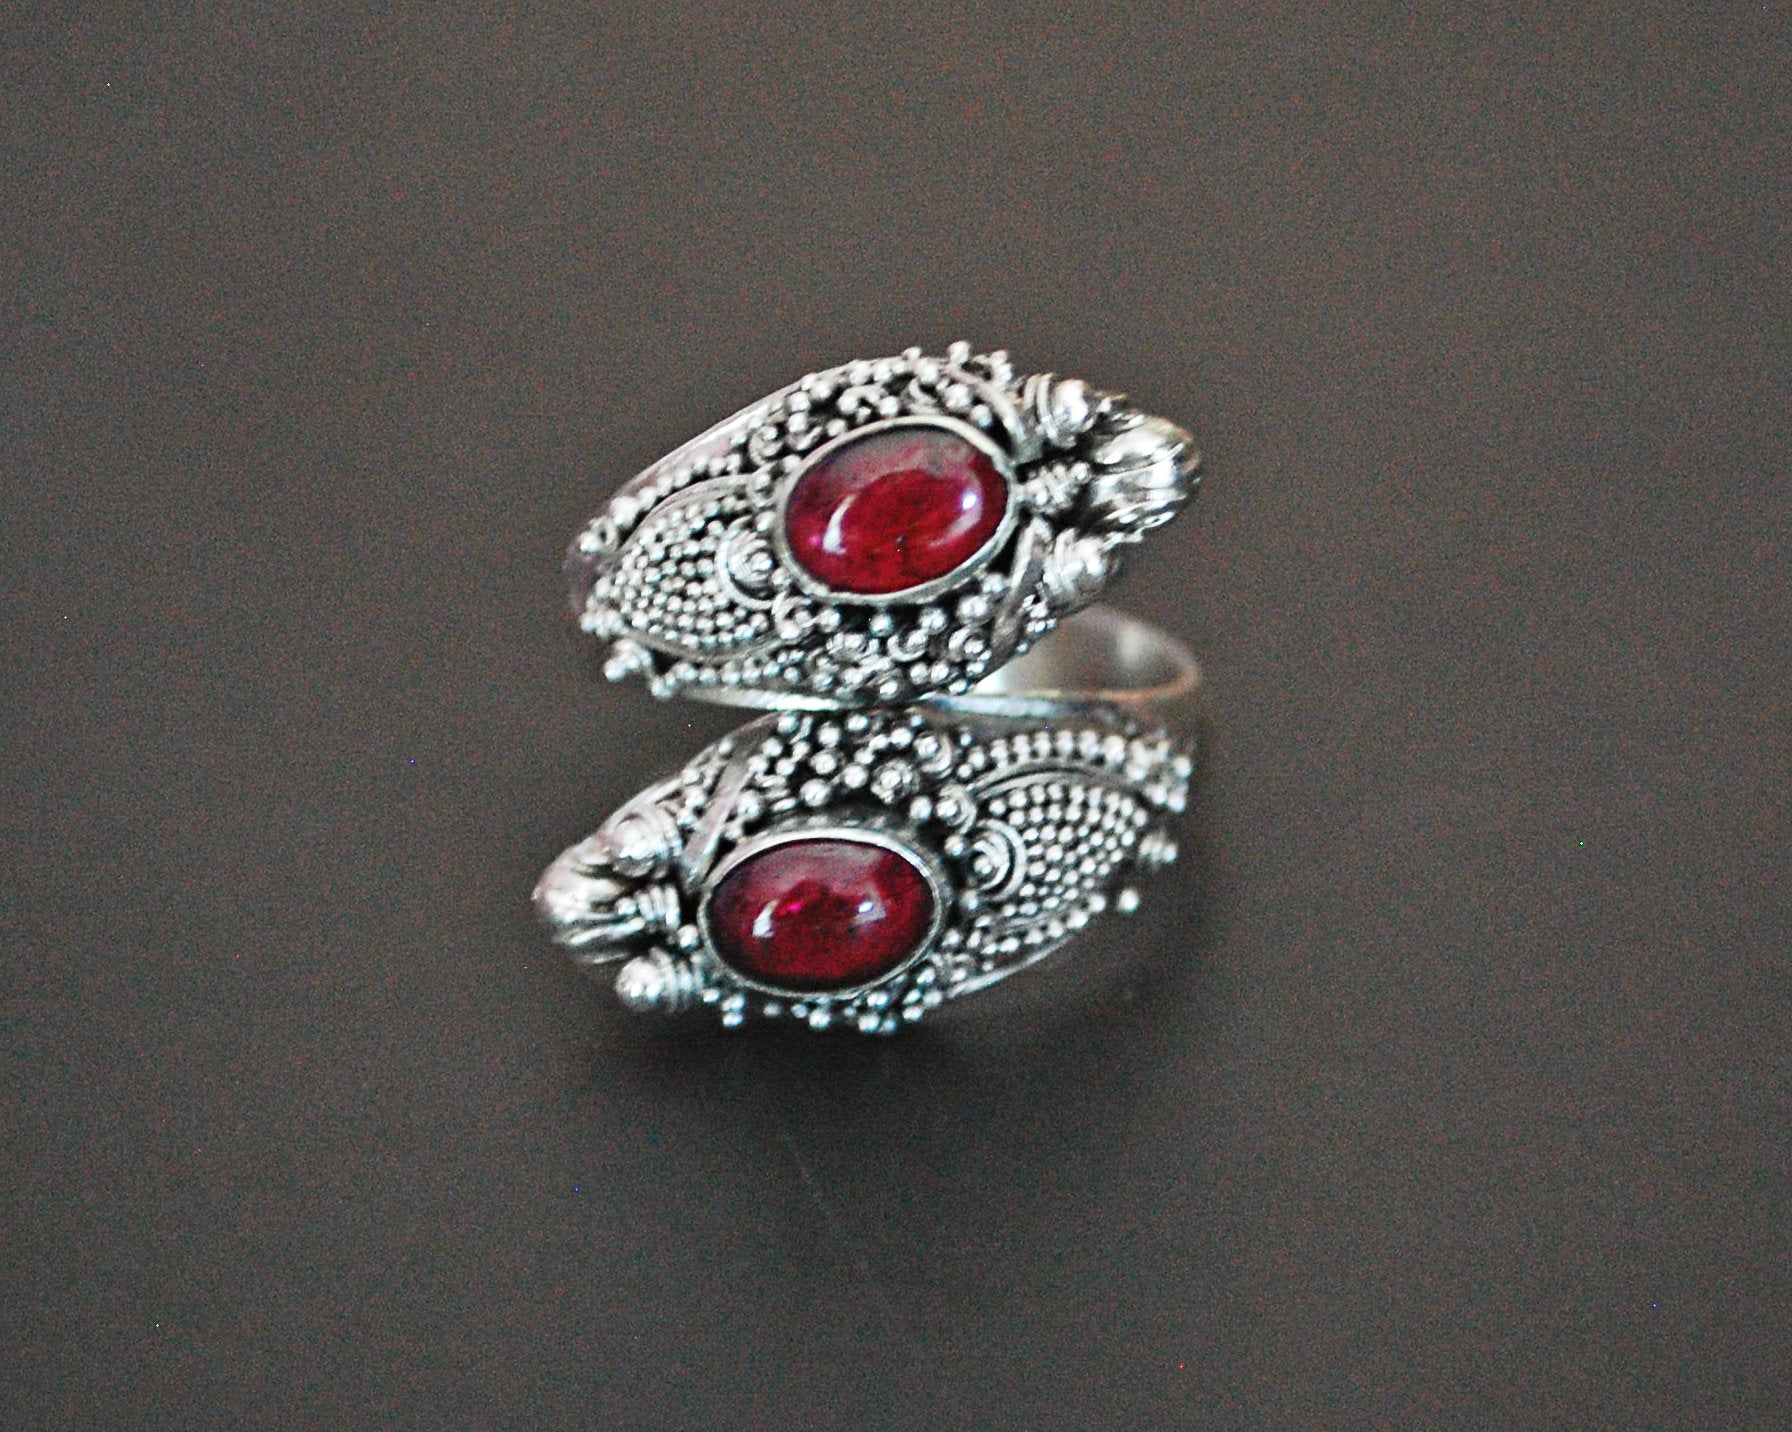 Double Dragon Garnet Ring from Bali - Size 7 / Adjustable